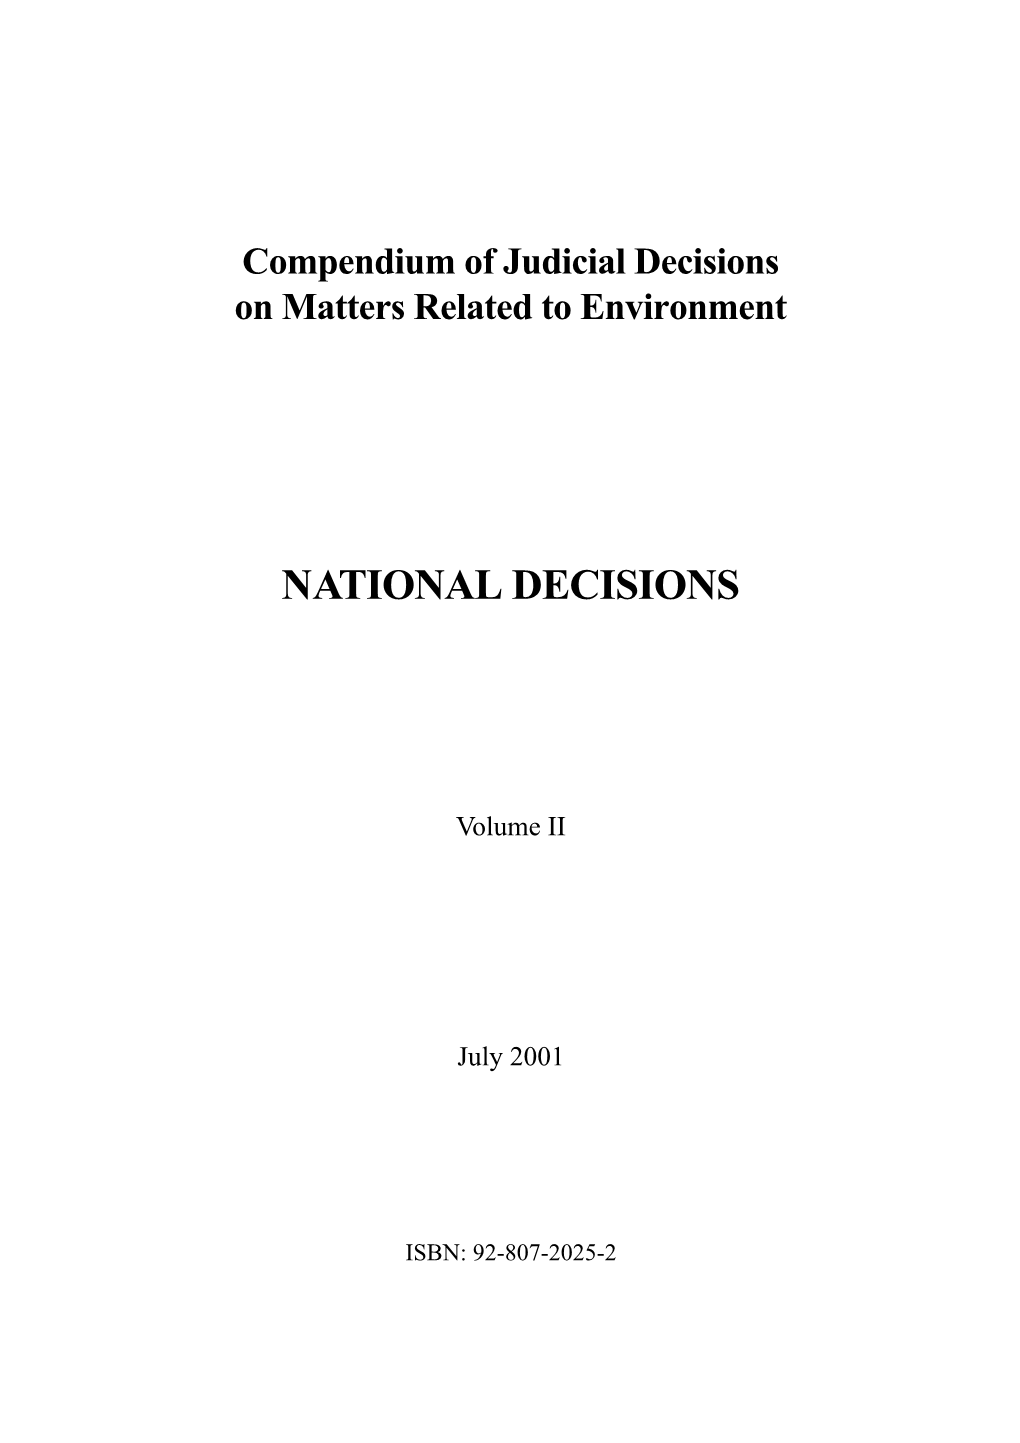 Compendium of Judicial Decisions on Matters Related to Environment